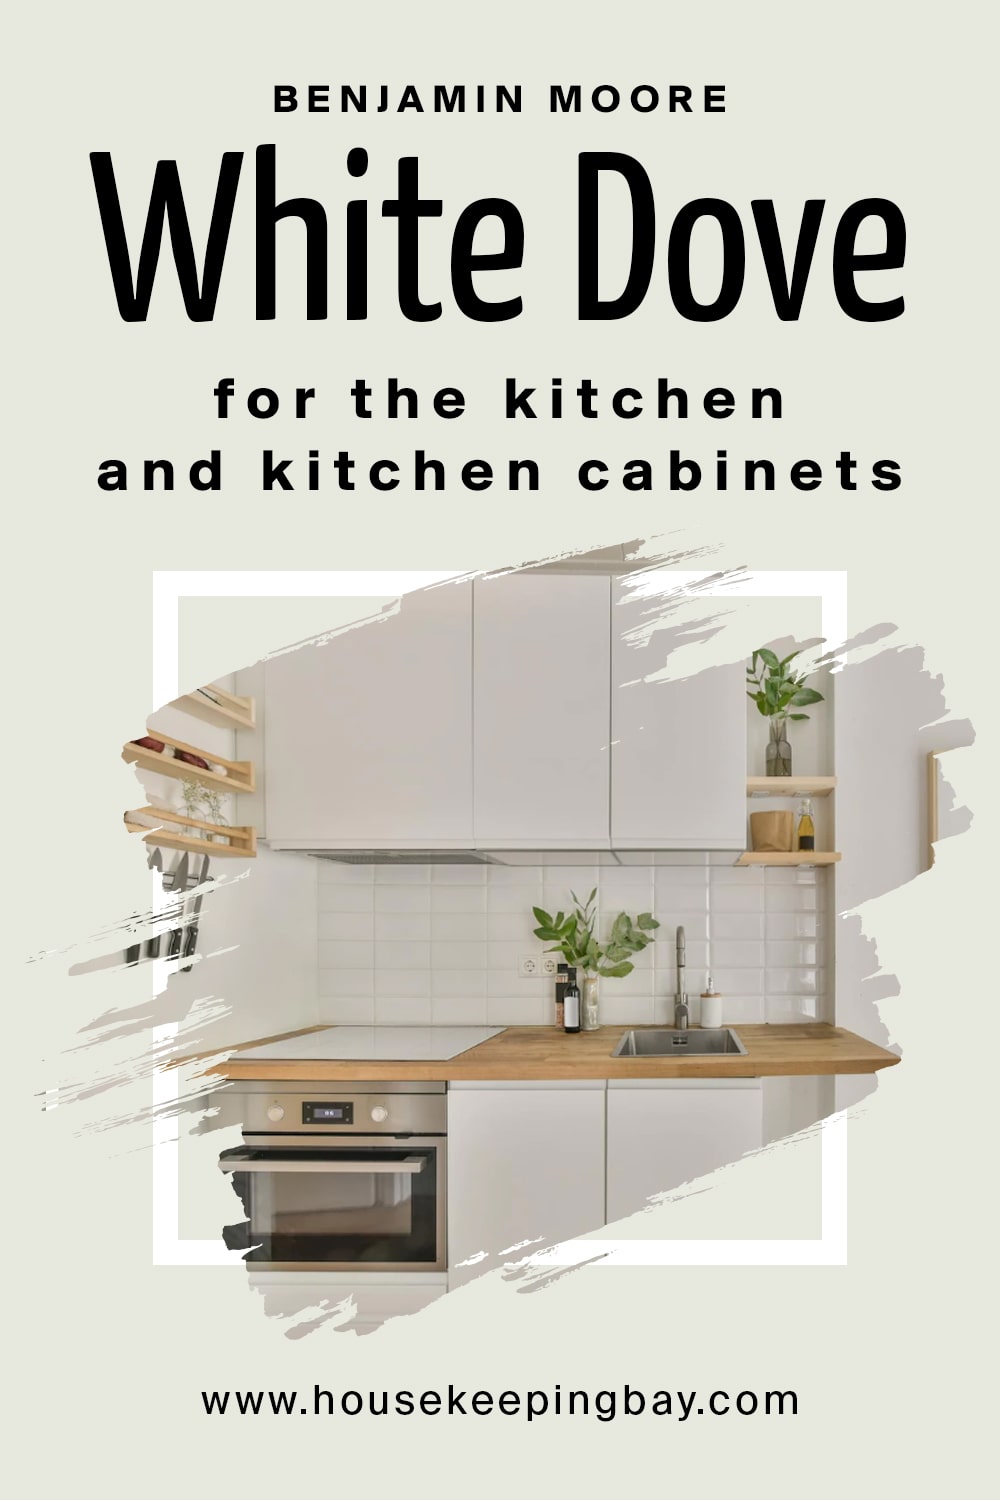 Benjamin Moore. White Dove for the kitchen and kitchen cabinets